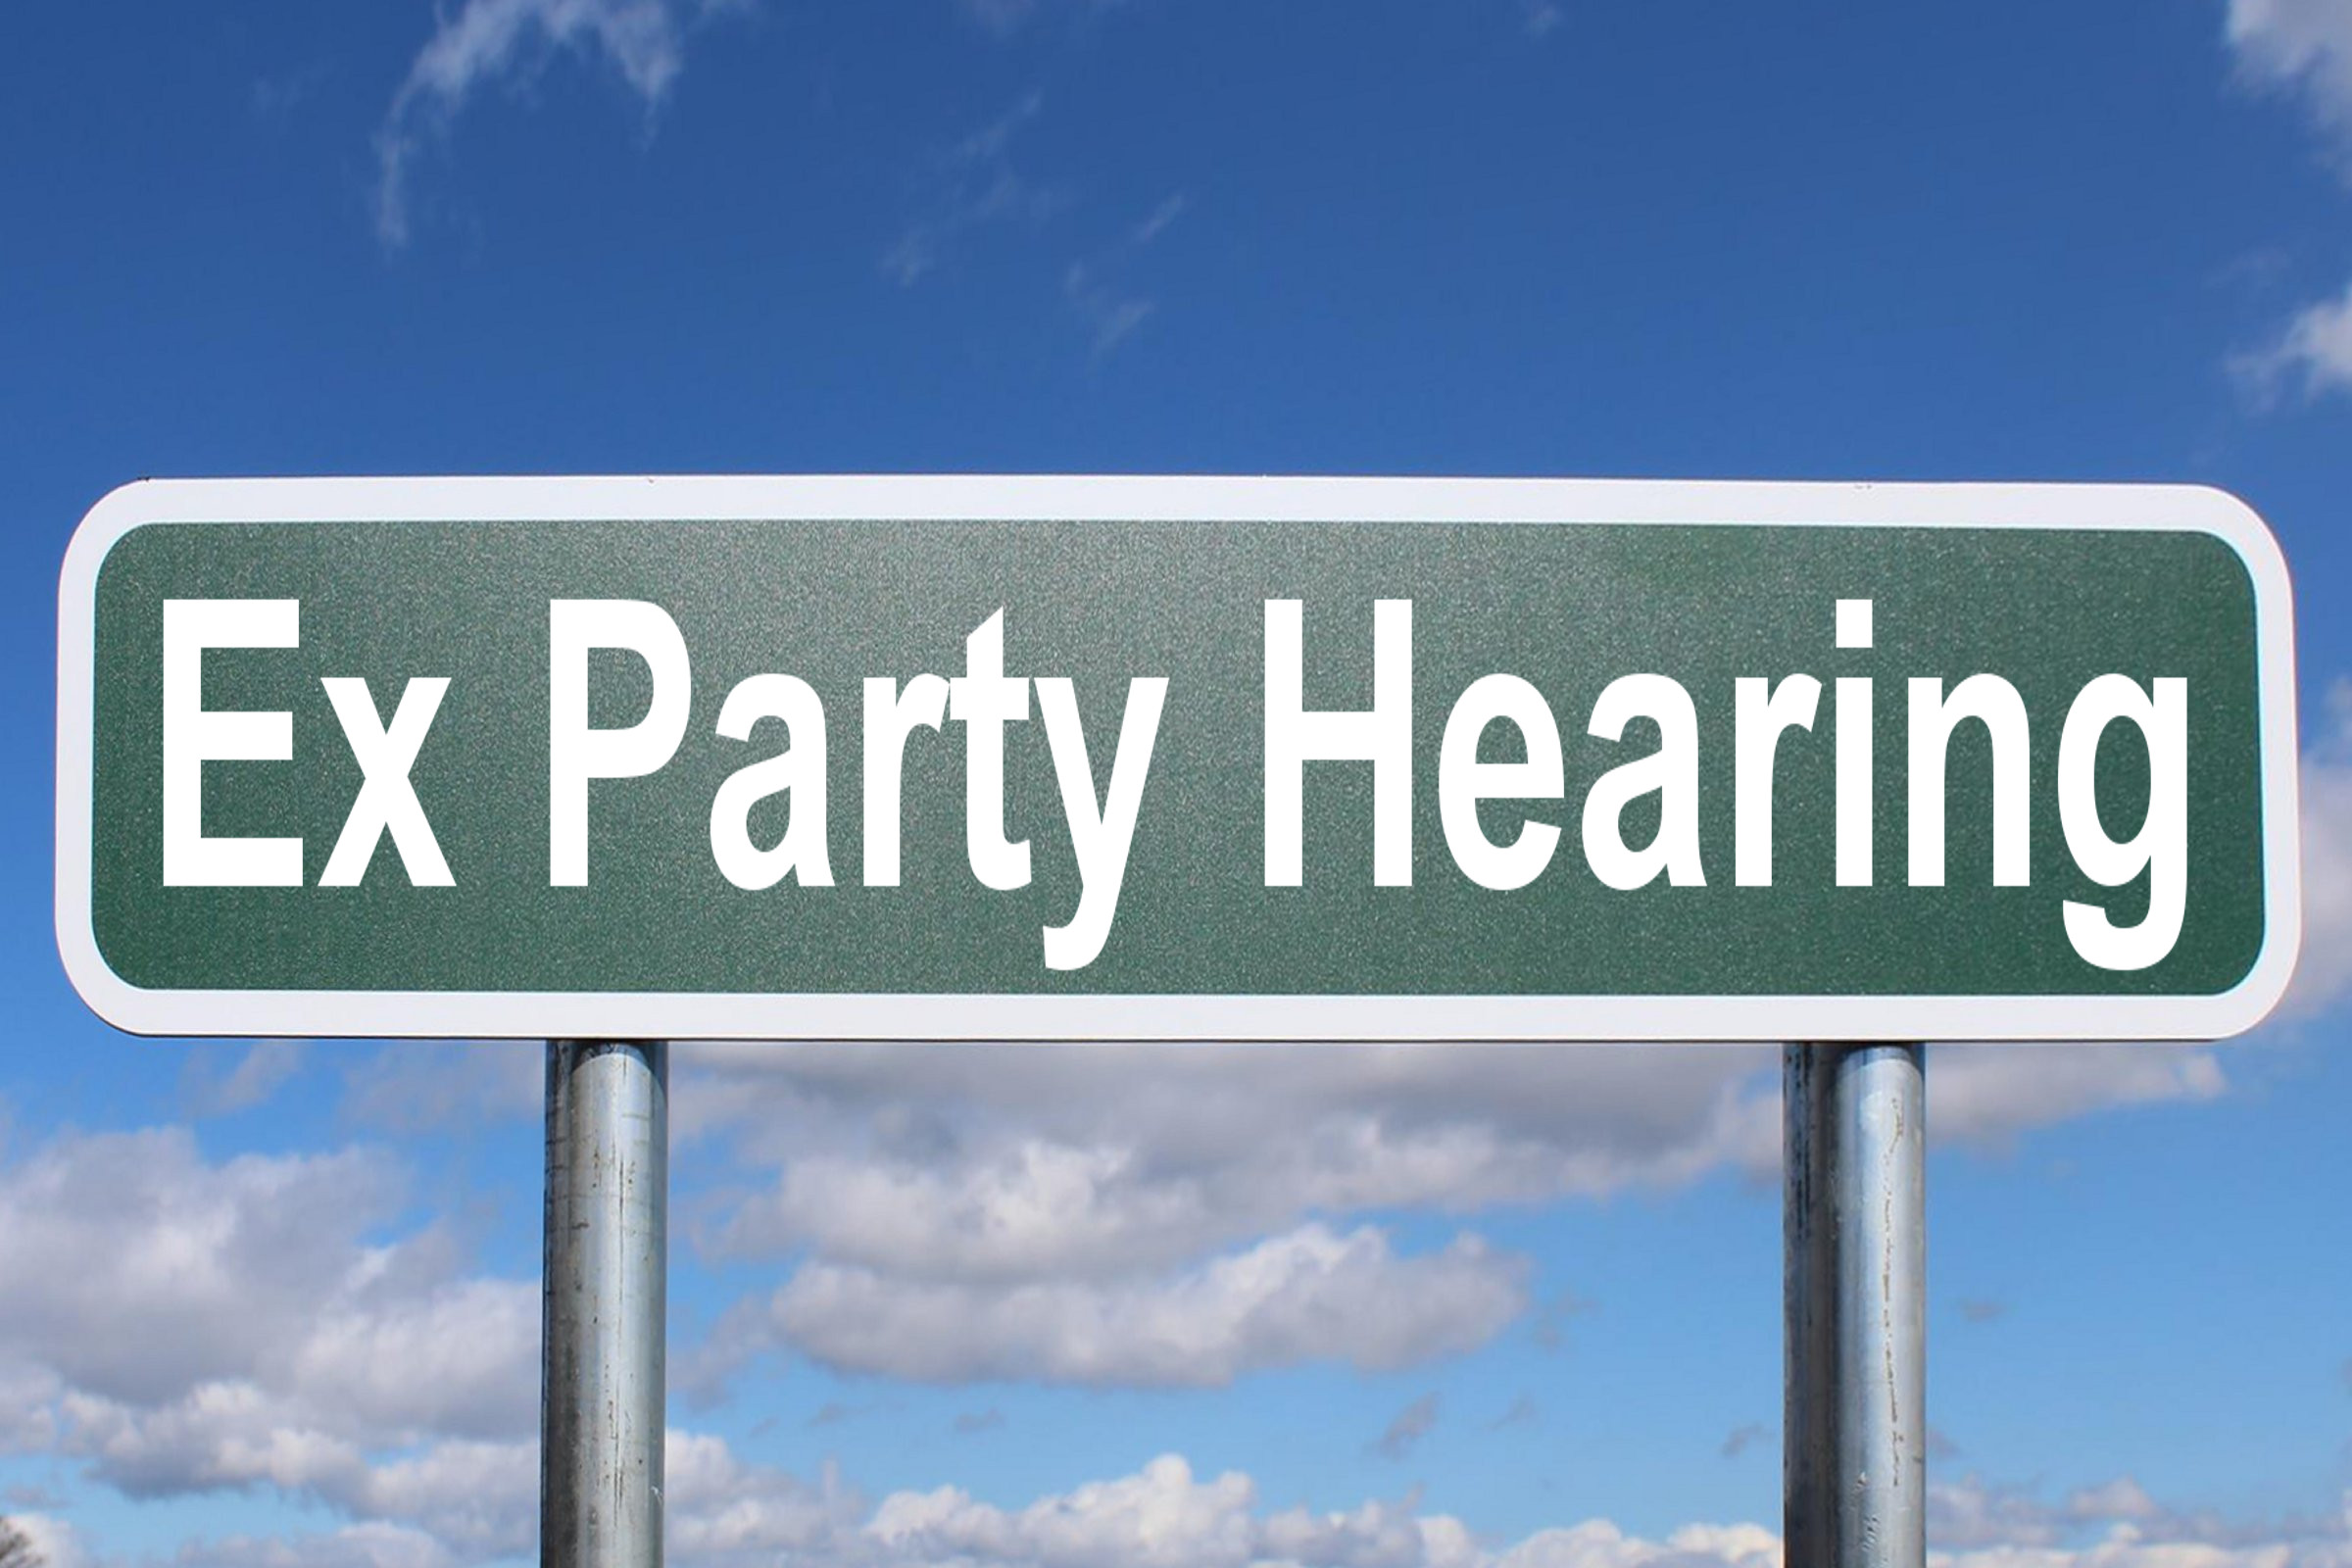 ex party hearing